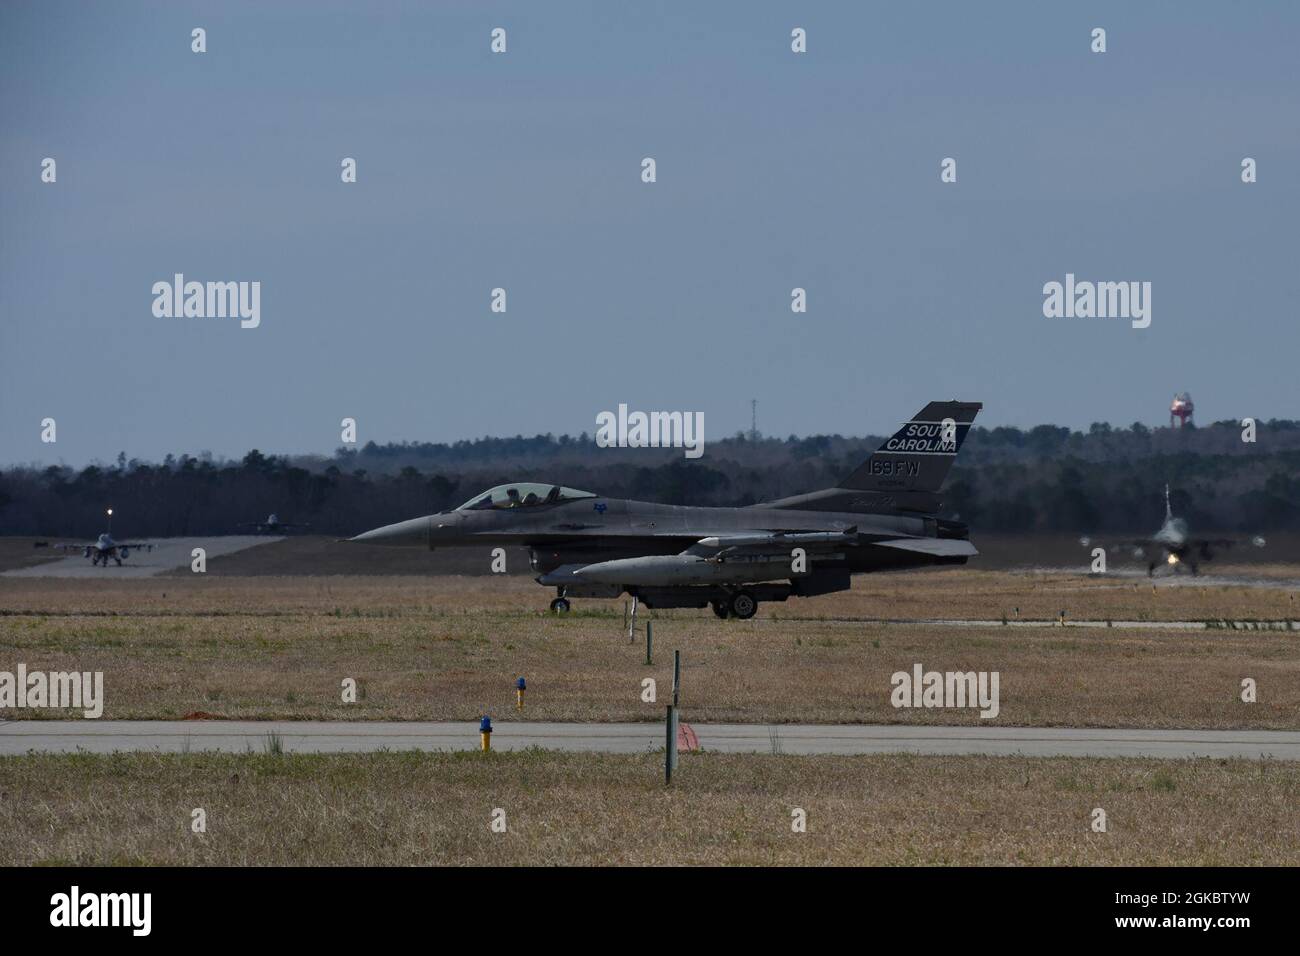 U.S. Air Force F-16 Fighting Falcon fighter jets assigned to the South Carolina Air National Guard's 169th Fighter Wing return to McEntire Joint National Guard Base, South Carolina after completing a training mission, March 6, 2021. Stock Photo